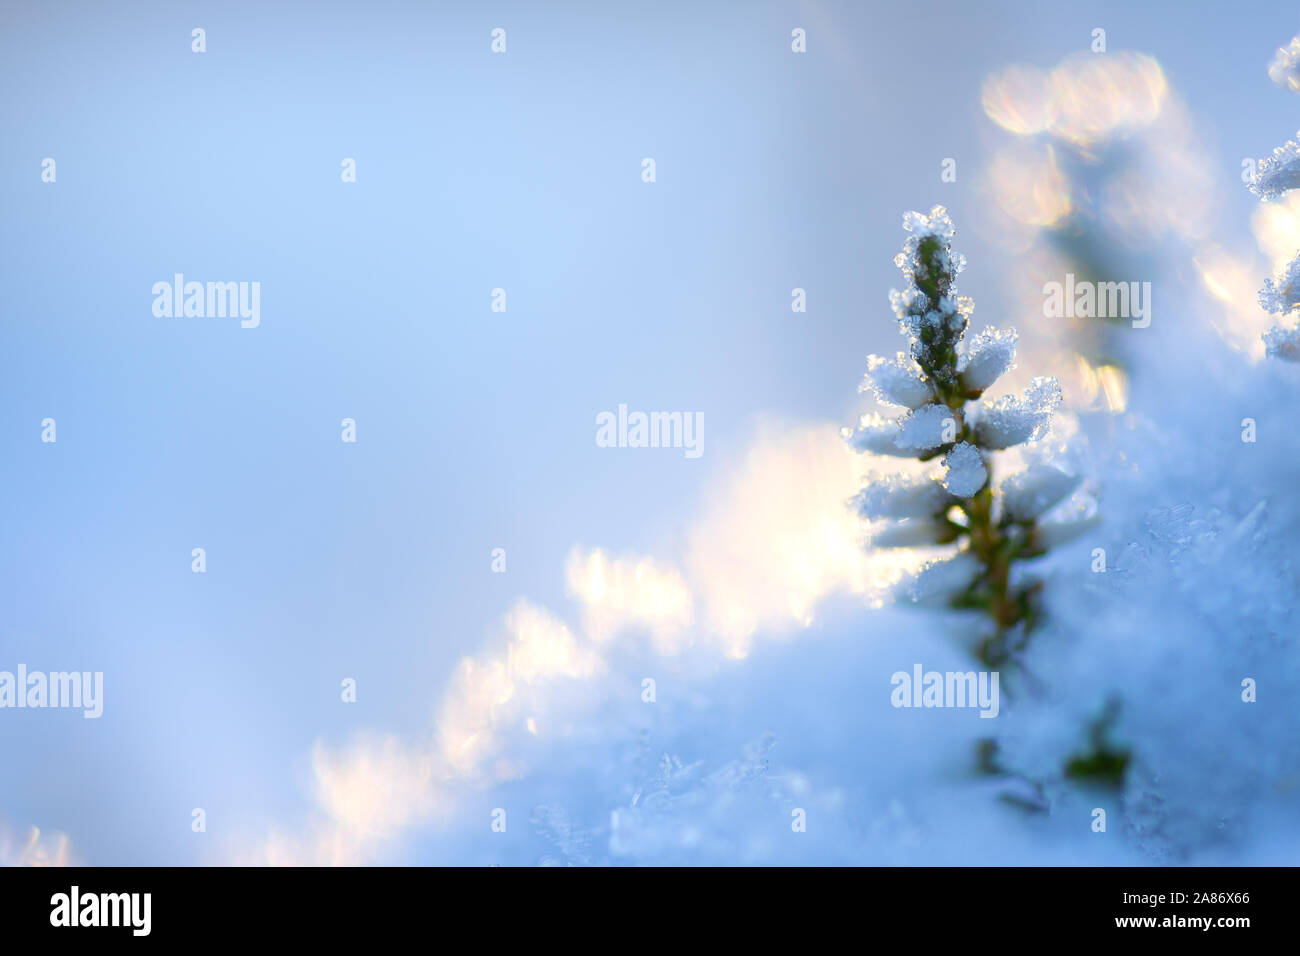 Common heather, Calluna vulgaris, flowers covered with ice crystals and snow Stock Photo